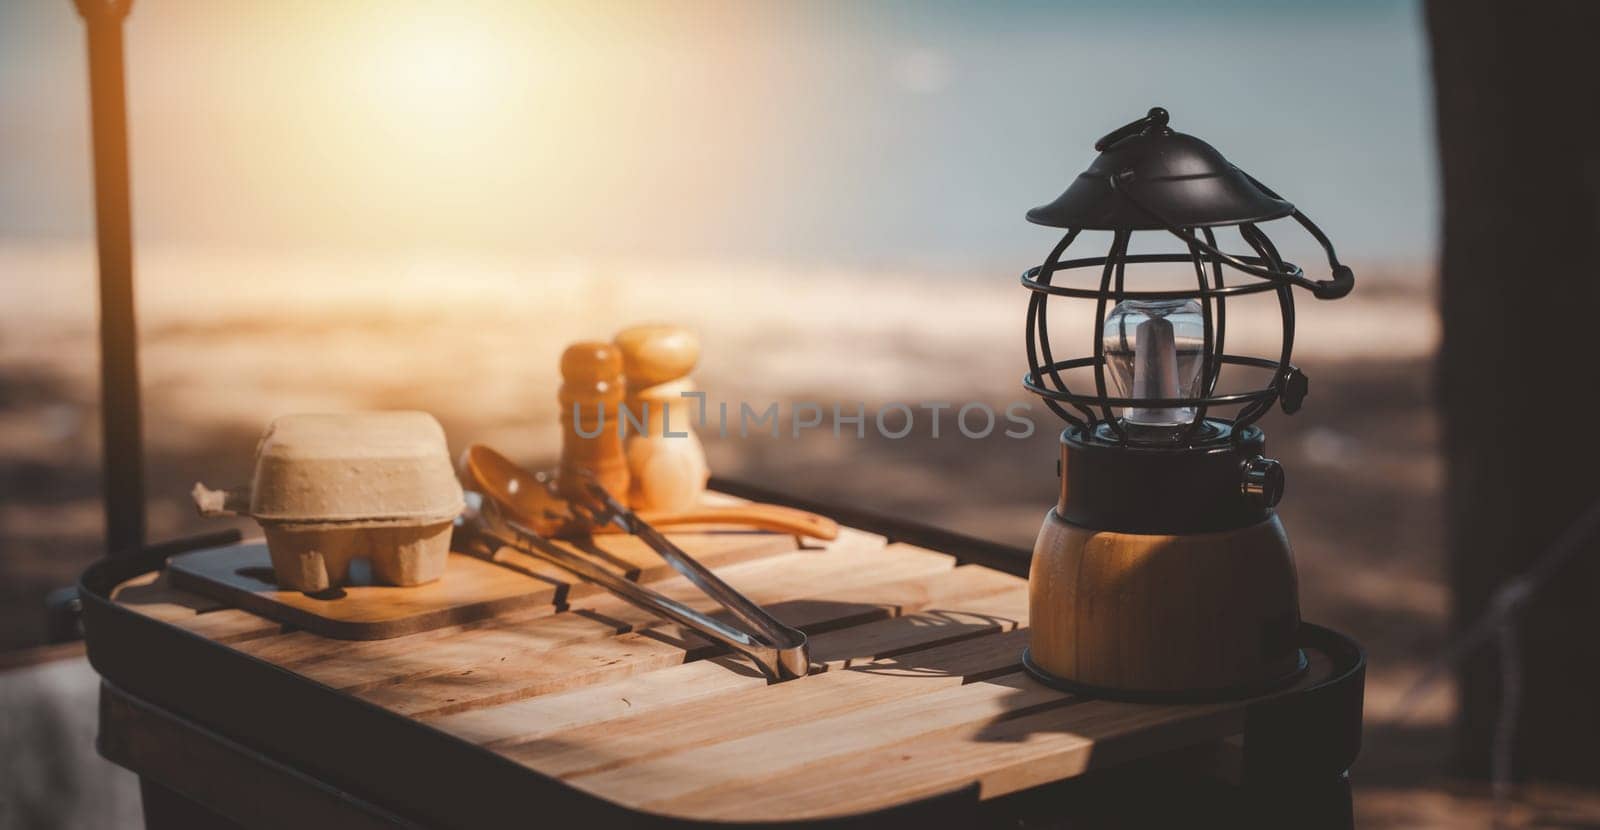 Old meets new on the campsite, A vintage kerosene lamp and a modern LED lantern on a wooden table. The perfect summer setup for camping and picnics. Illuminate your environment. by Sorapop